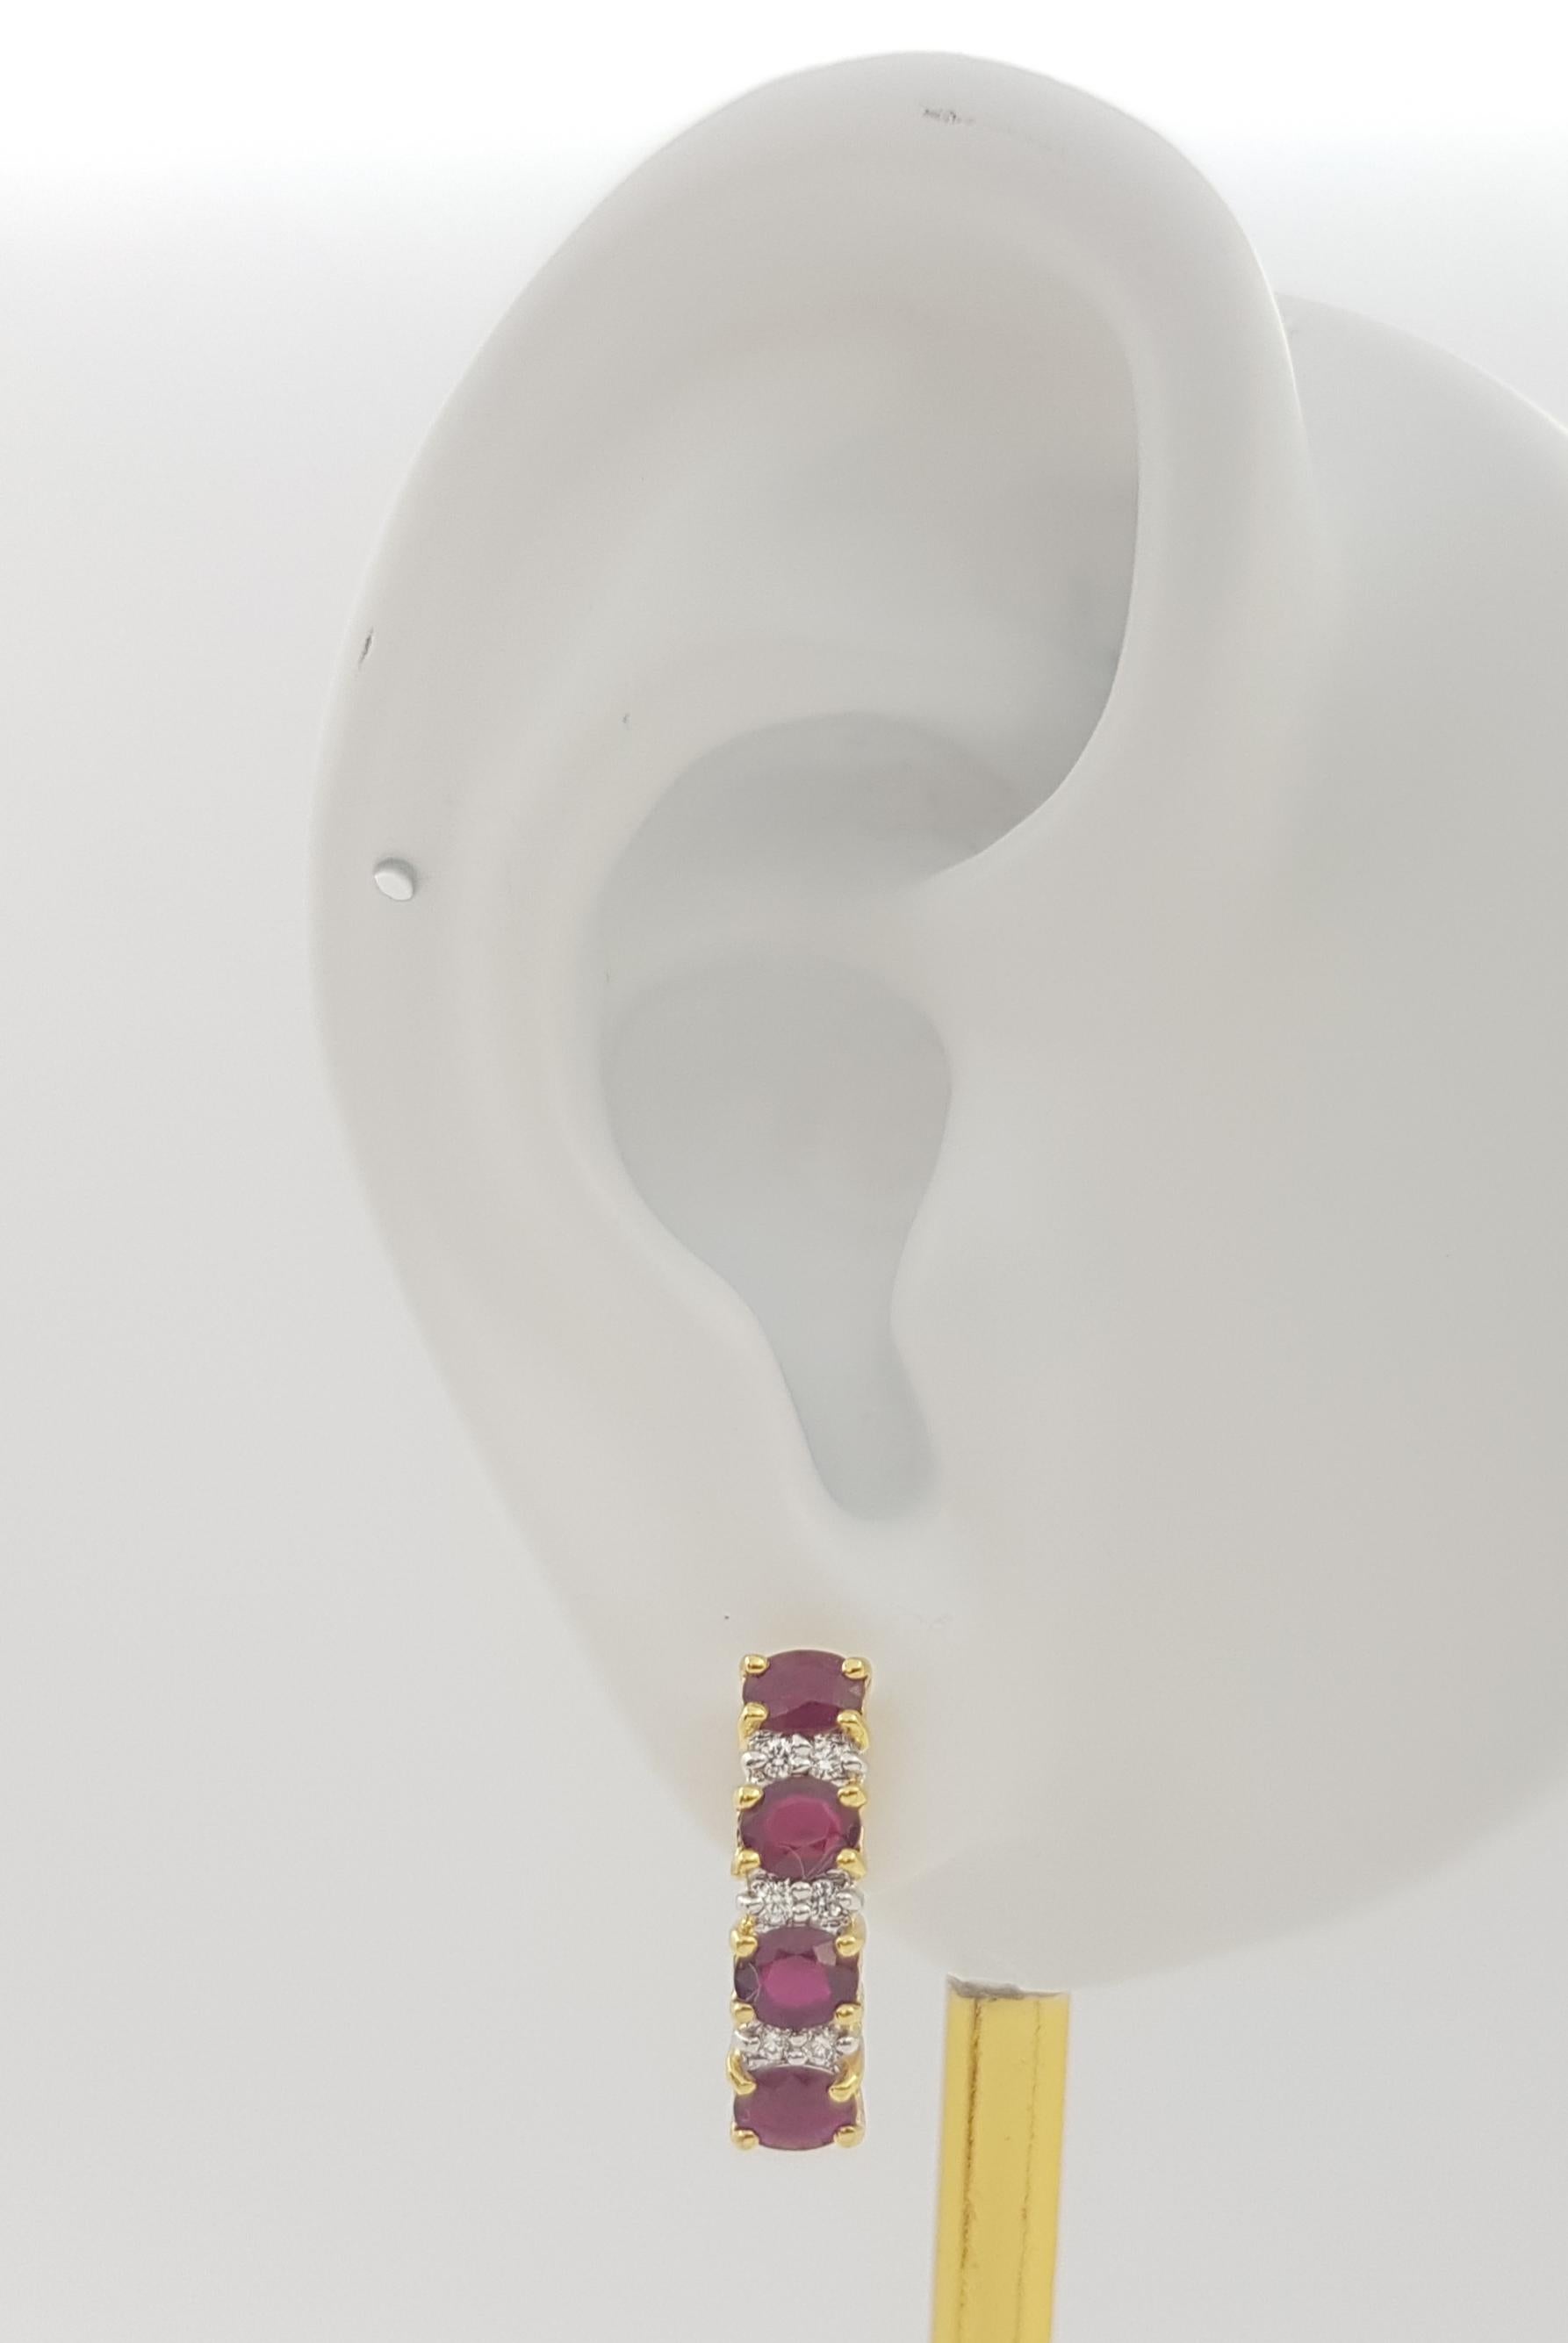 Ruby 1.58 carats with Diamond 0.10 carat Earrings set in 18K Gold Settings

Width: 0.4 cm 
Length: 1.6 cm
Total Weight: 4.26 grams

